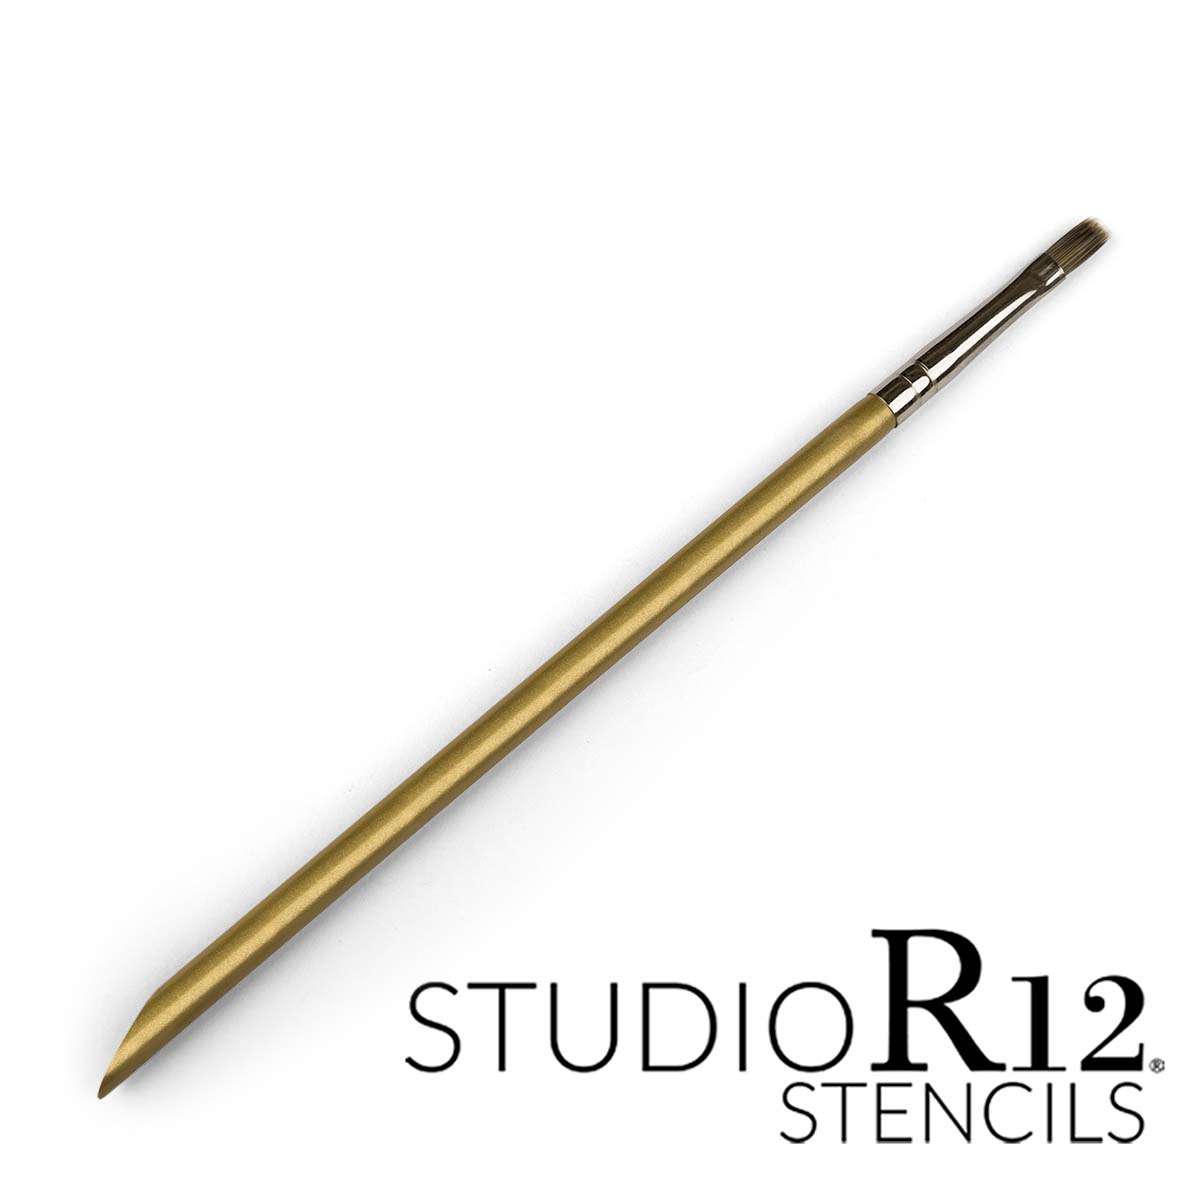 Workhorse Flat Brush by StudioR12 | Select Size